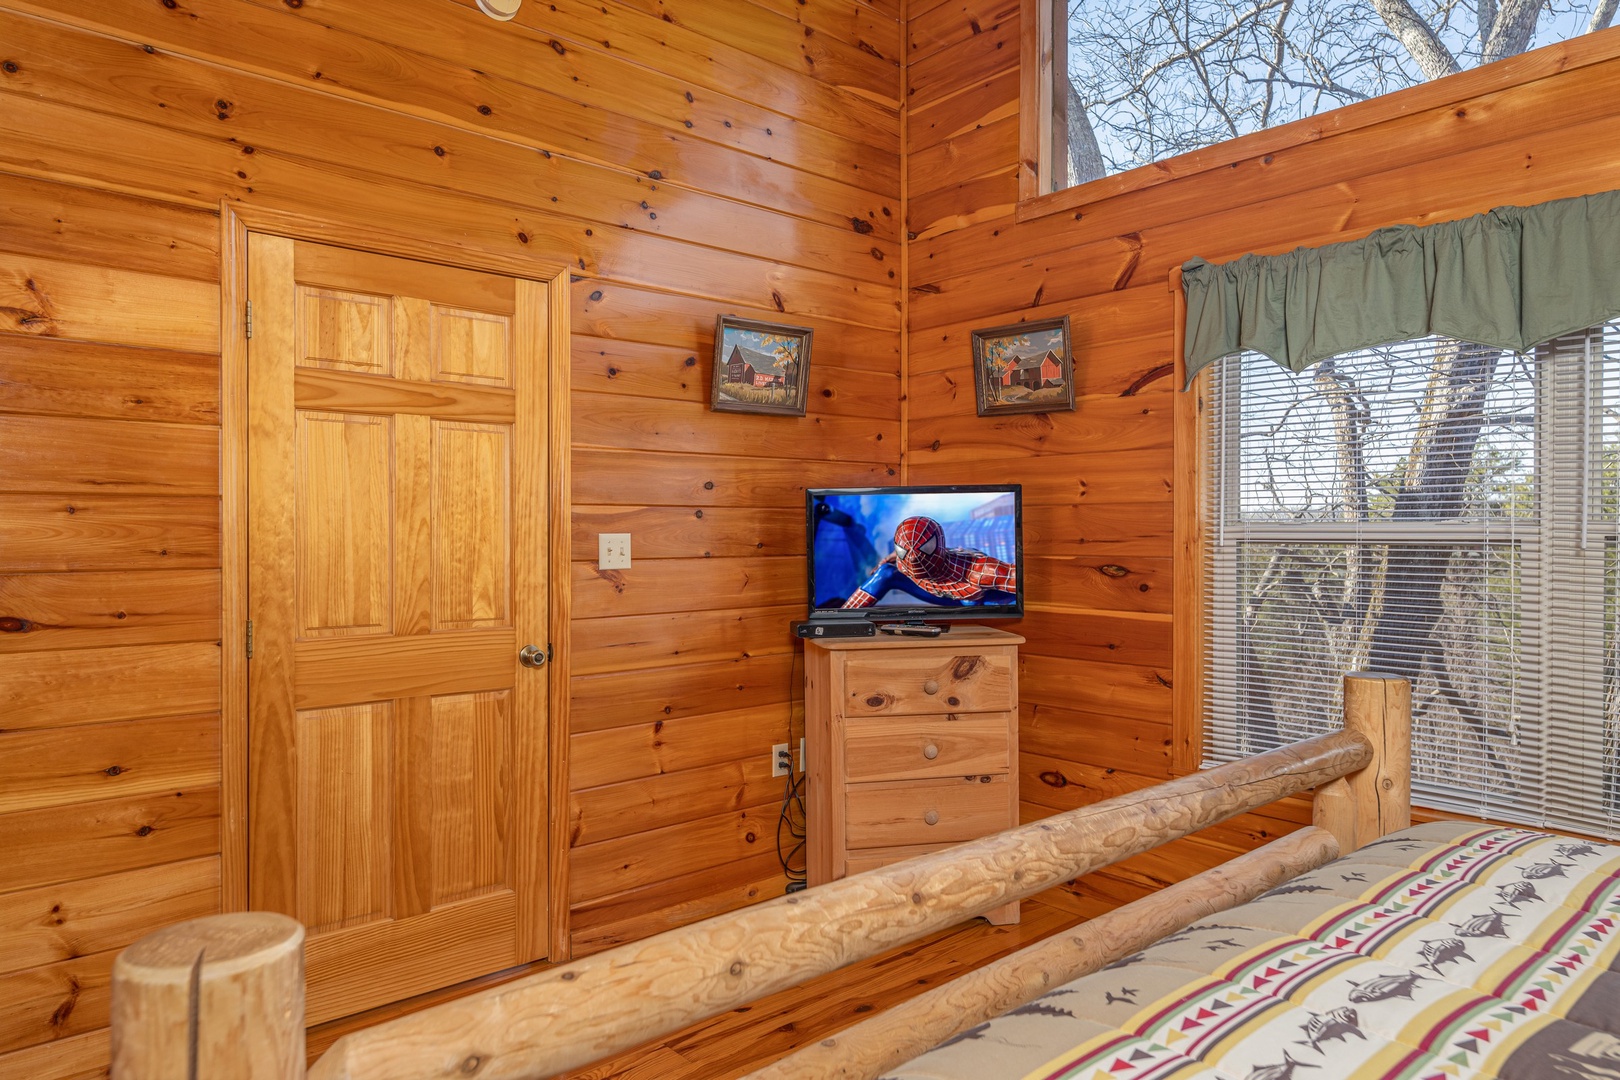 Bedroom with dresser and TV at Hickernut Lodge, a 5-bedroom cabin rental located in Pigeon Forge